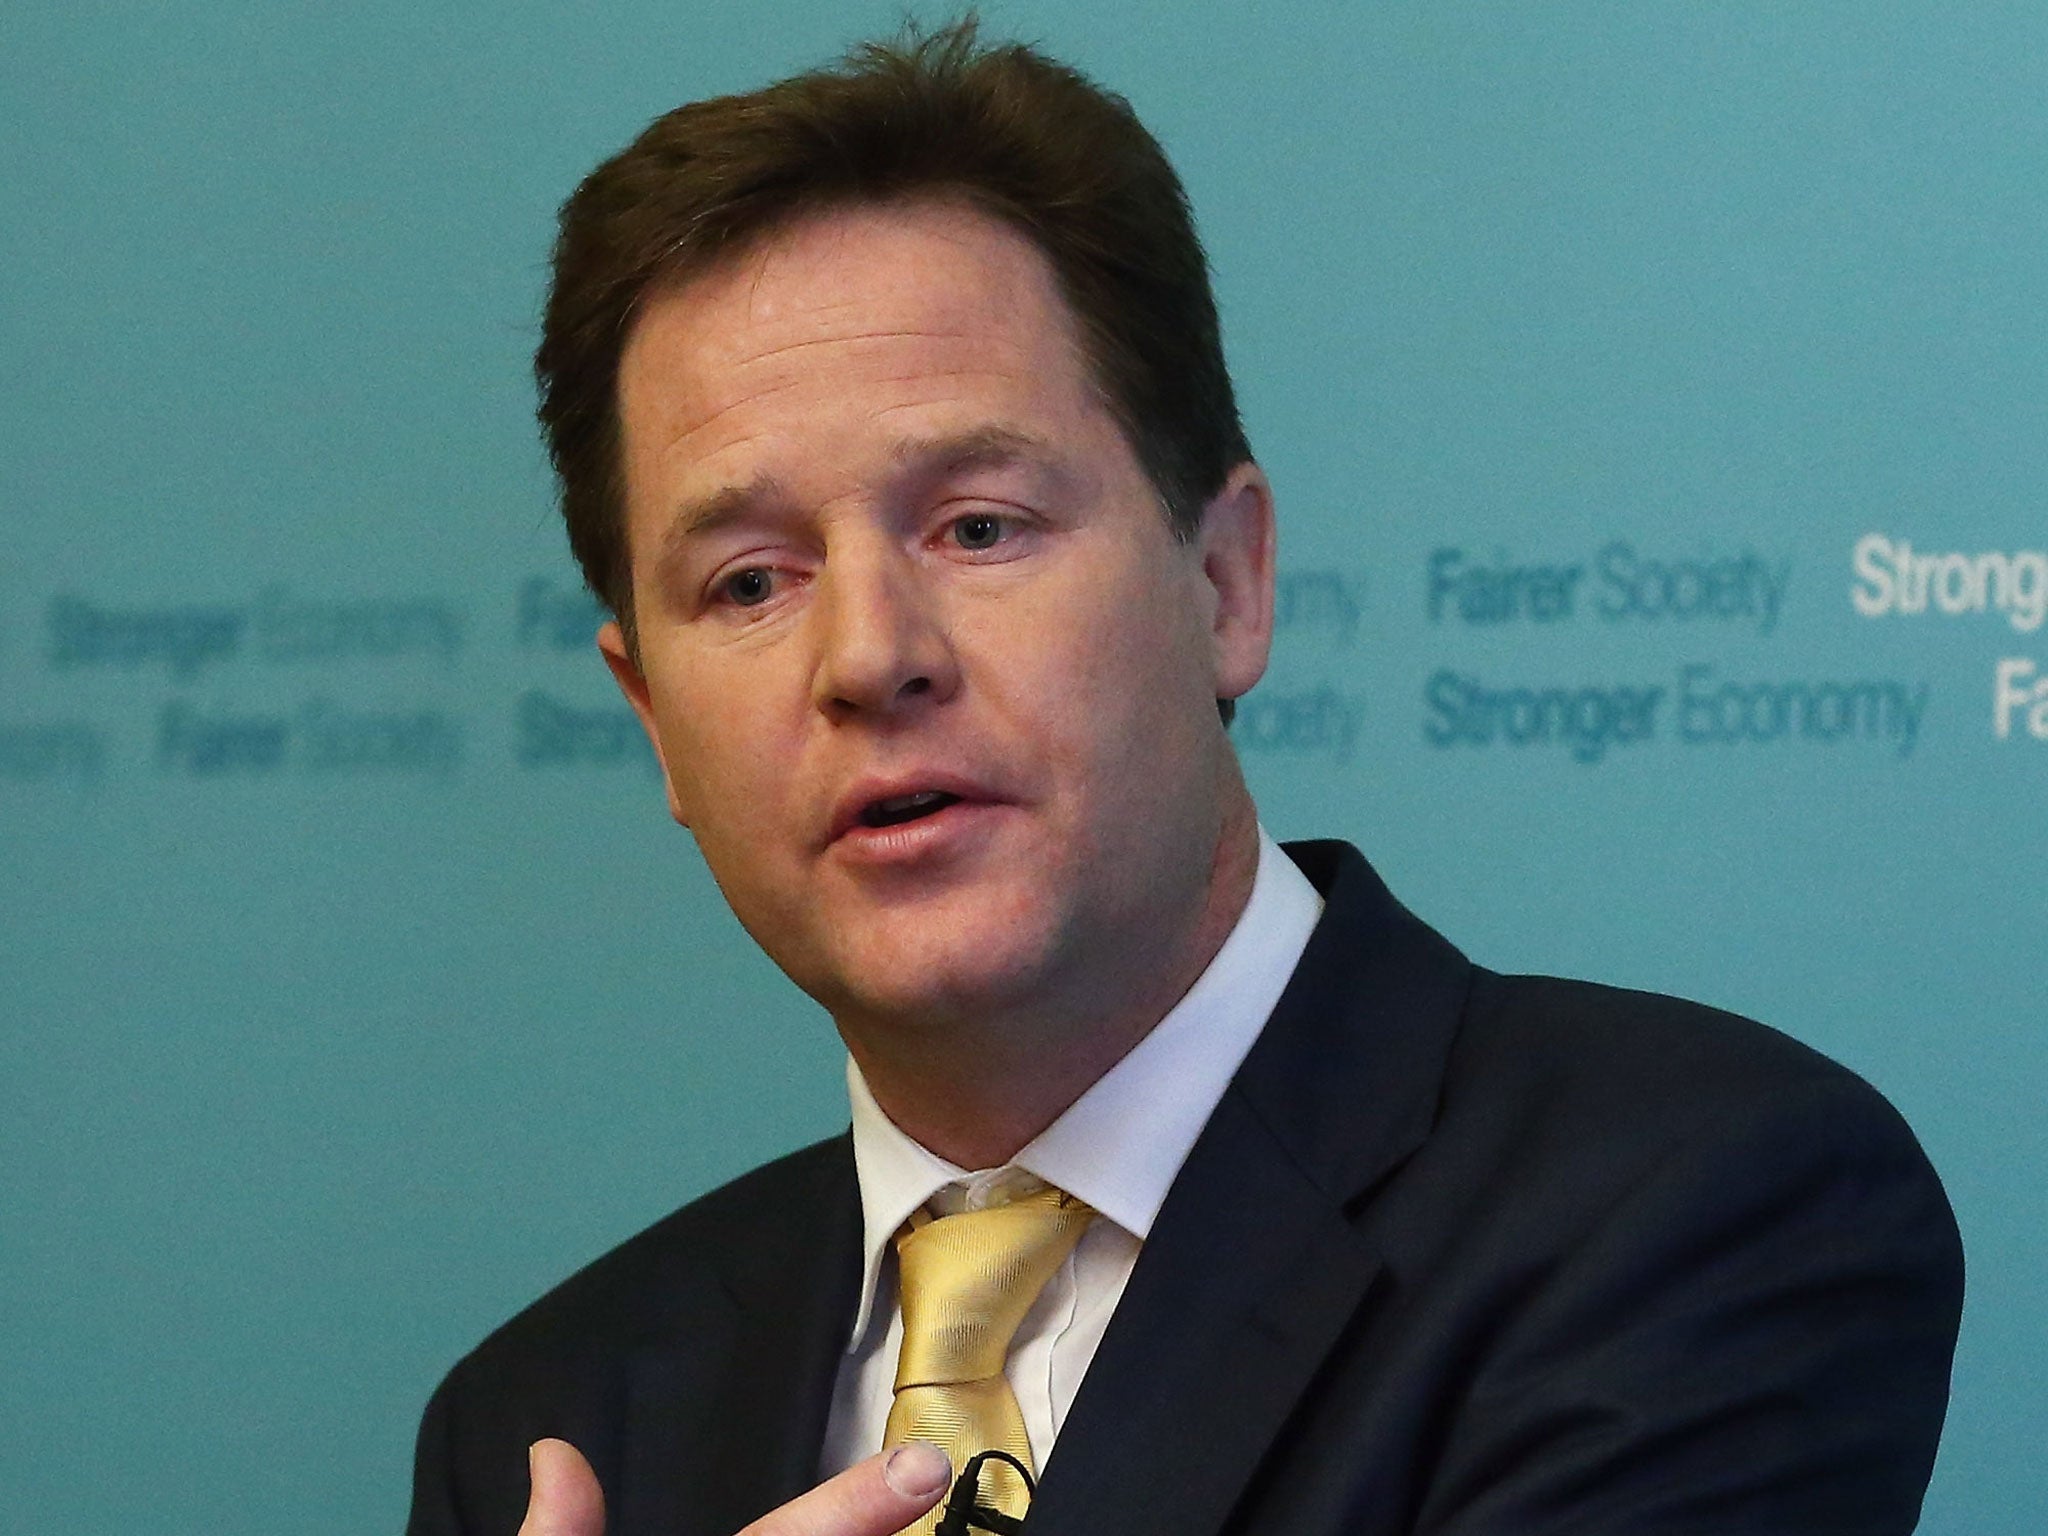 Welfare for the wealthy must be tackled before the government makes any further benefit cuts, Nick Clegg said